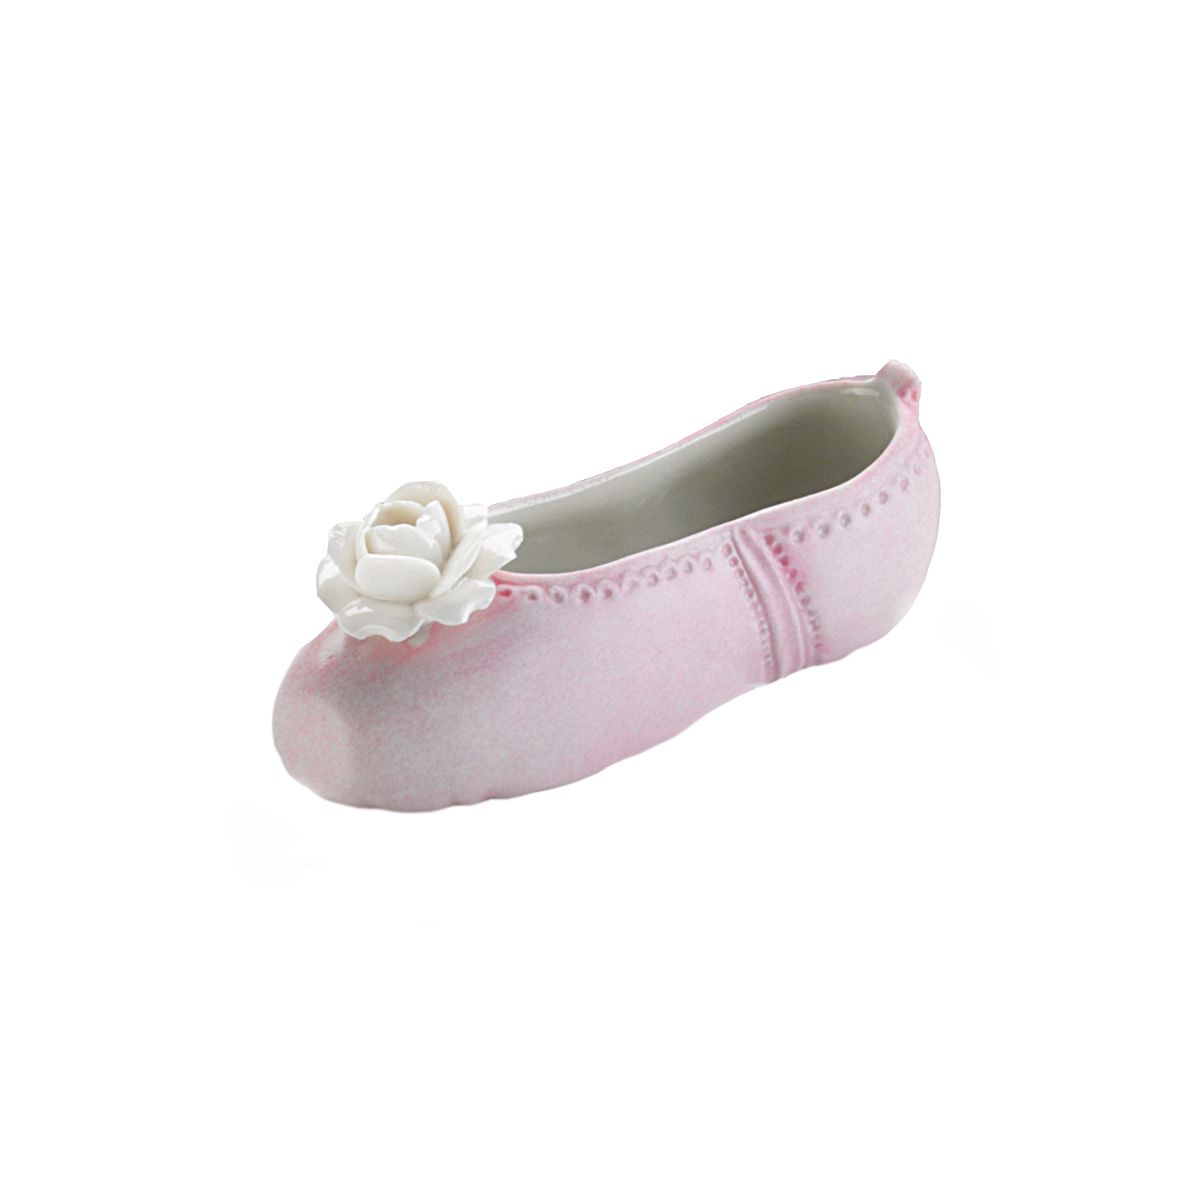 Ballet Shoe - Small Size - 9 Cm - Pink &amp; White 